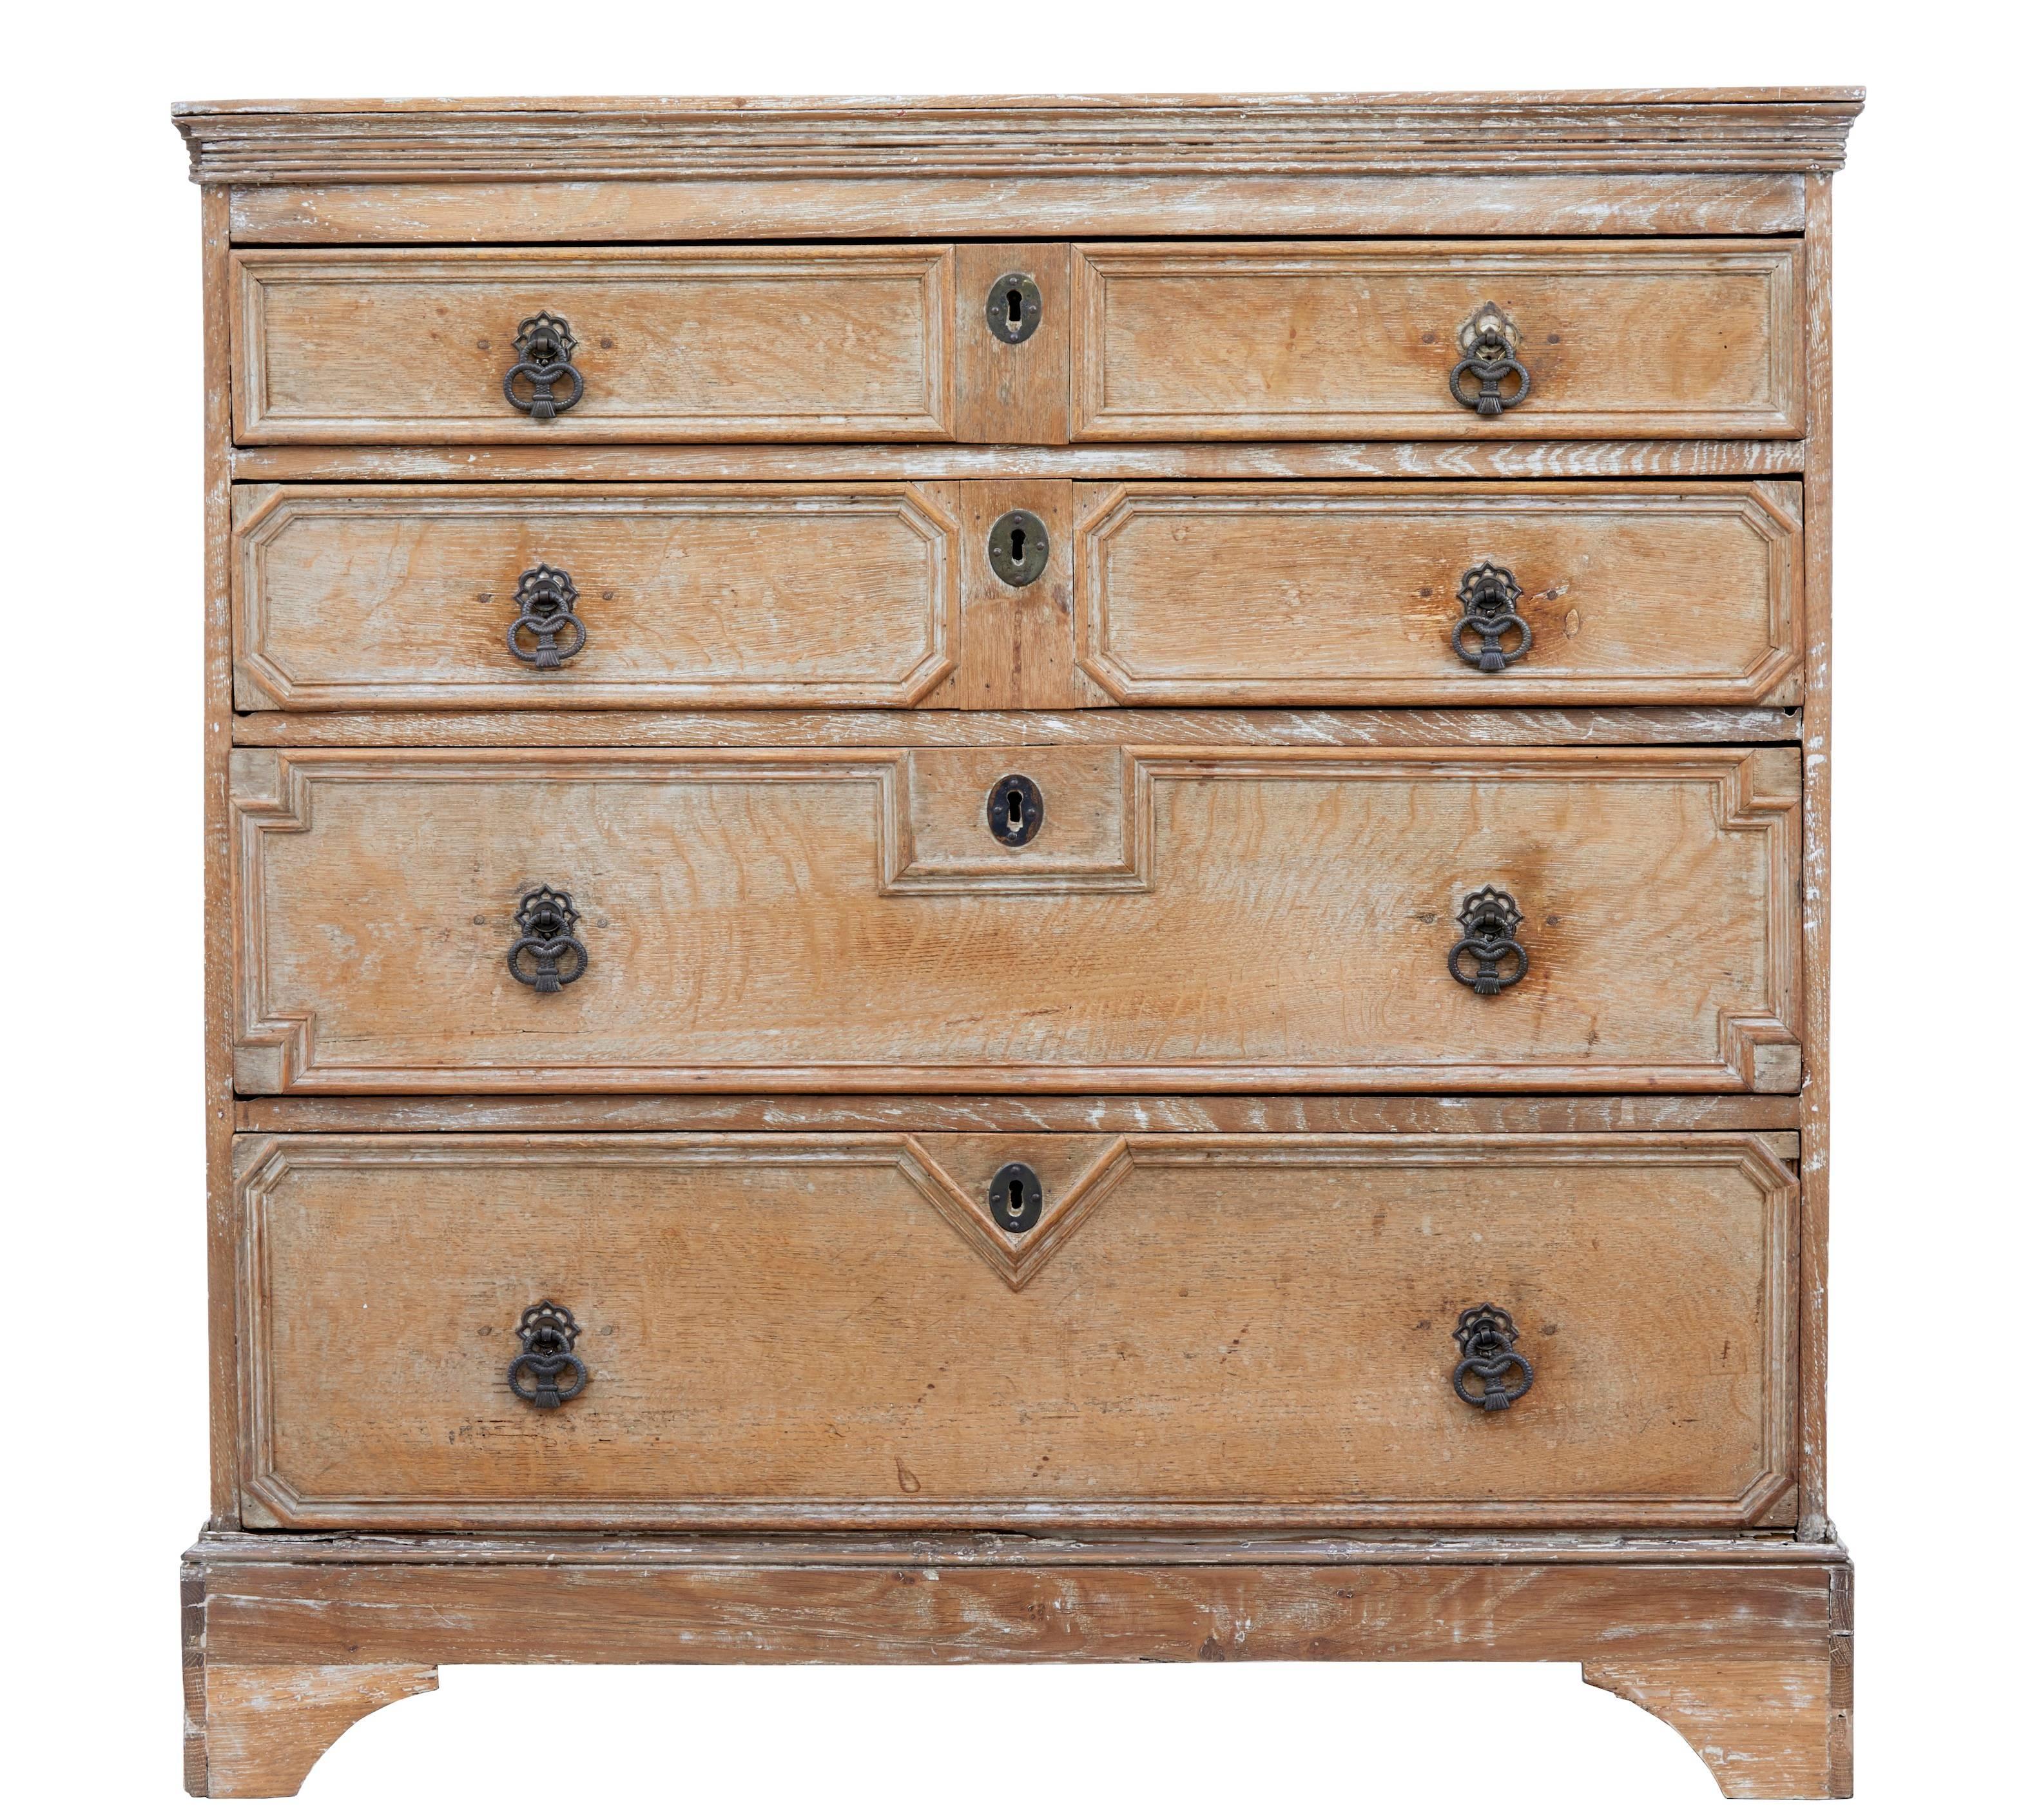 19th century four-drawer chest of drawers, circa 1840.
Four graduating drawers with geometric moulding.
Limed chest with pine drawer linings
Standing on bracket feet.

Areas of restoration to age splits, one replaced handle